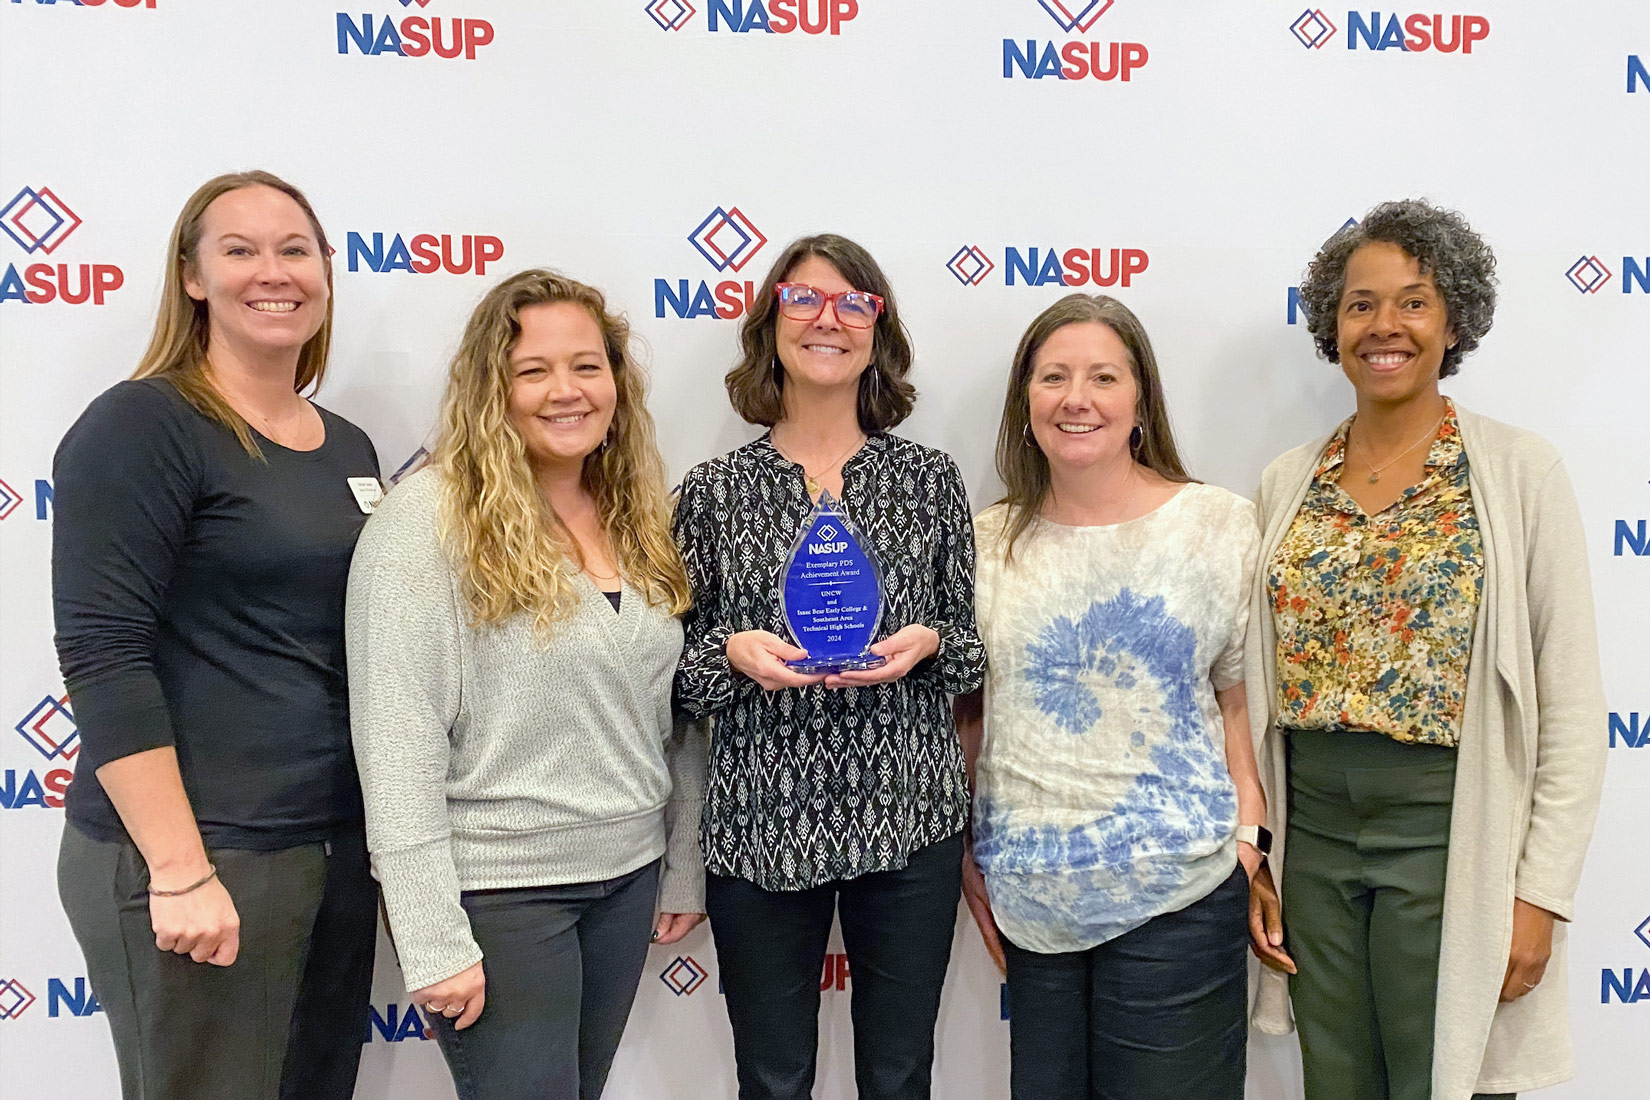 Watson College of Education’s Professional Development System (PDS) School-University Partnership has received the 2024 Exemplary PDS Award from the National Association of School-University Partnerships. Pictured (left to right) are WCE faculty Somer Lewis, Ashley Wall, Danielle Talbert, Christa Thompkins, Candace Thompson.